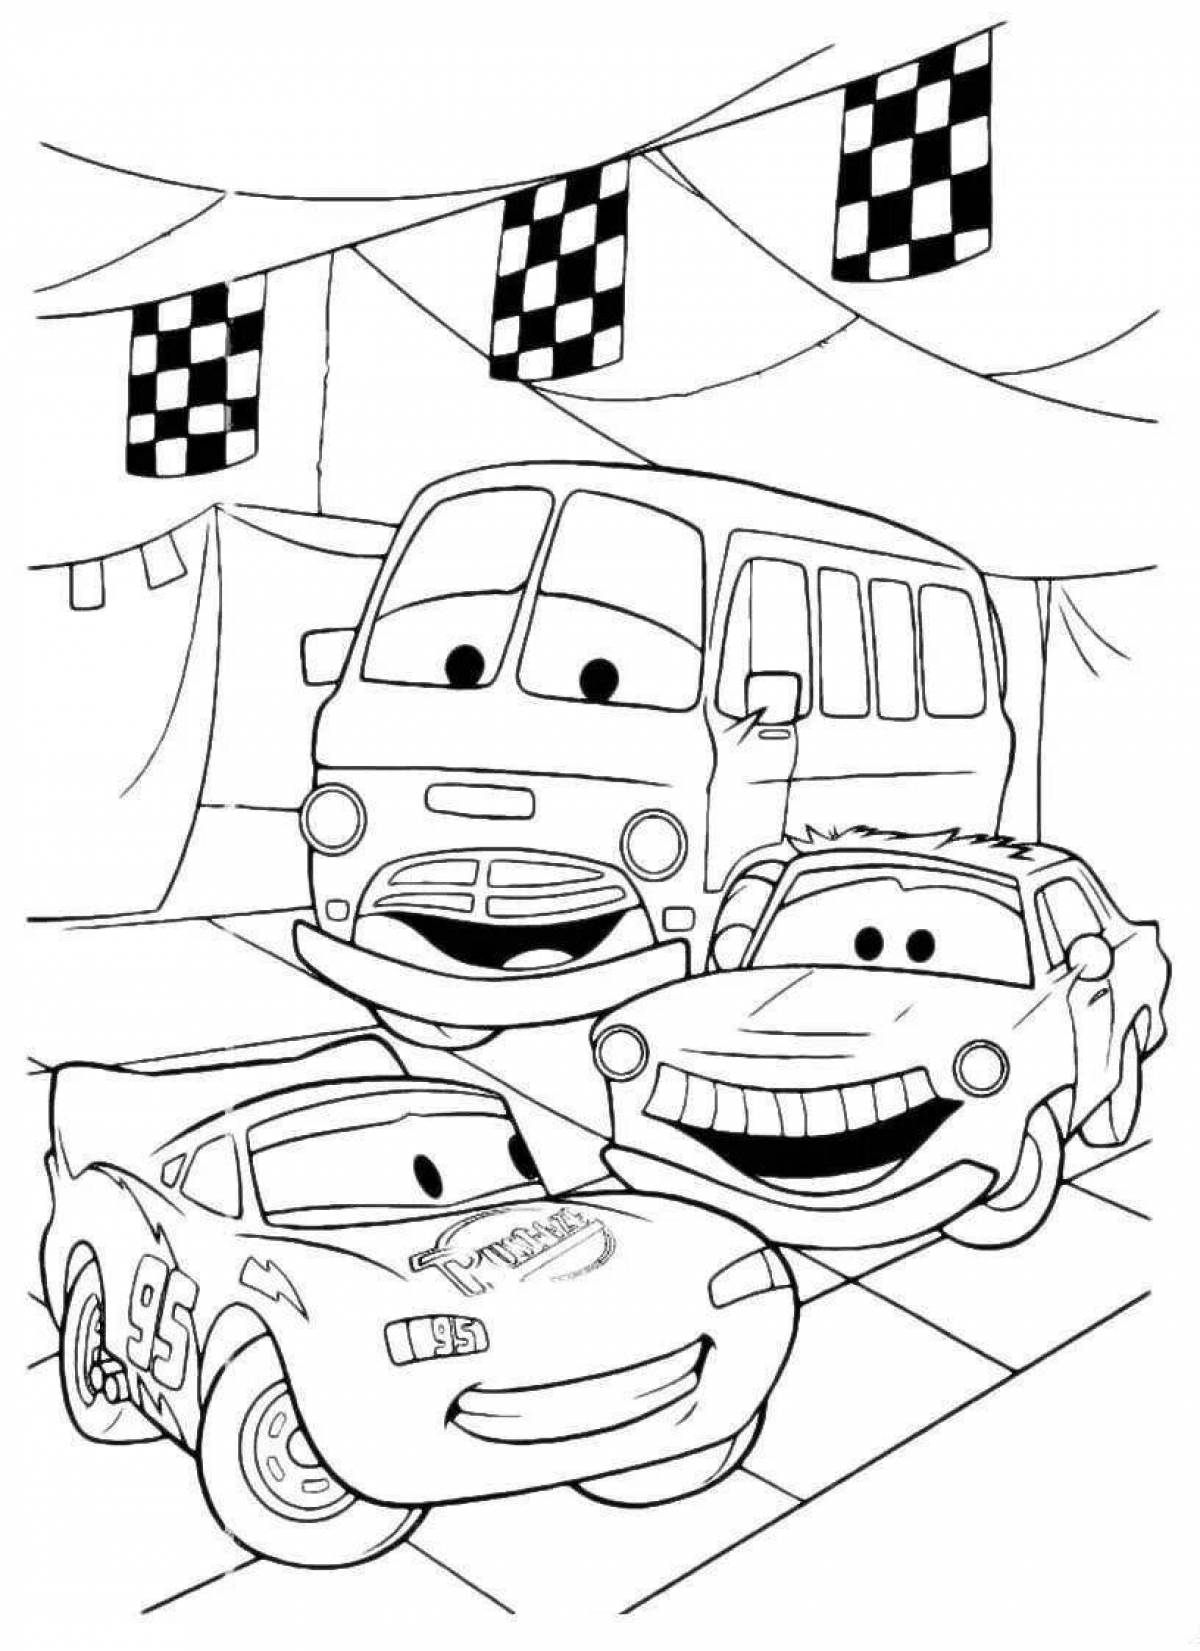 Amazing cars coloring book for kids 6-7 years old